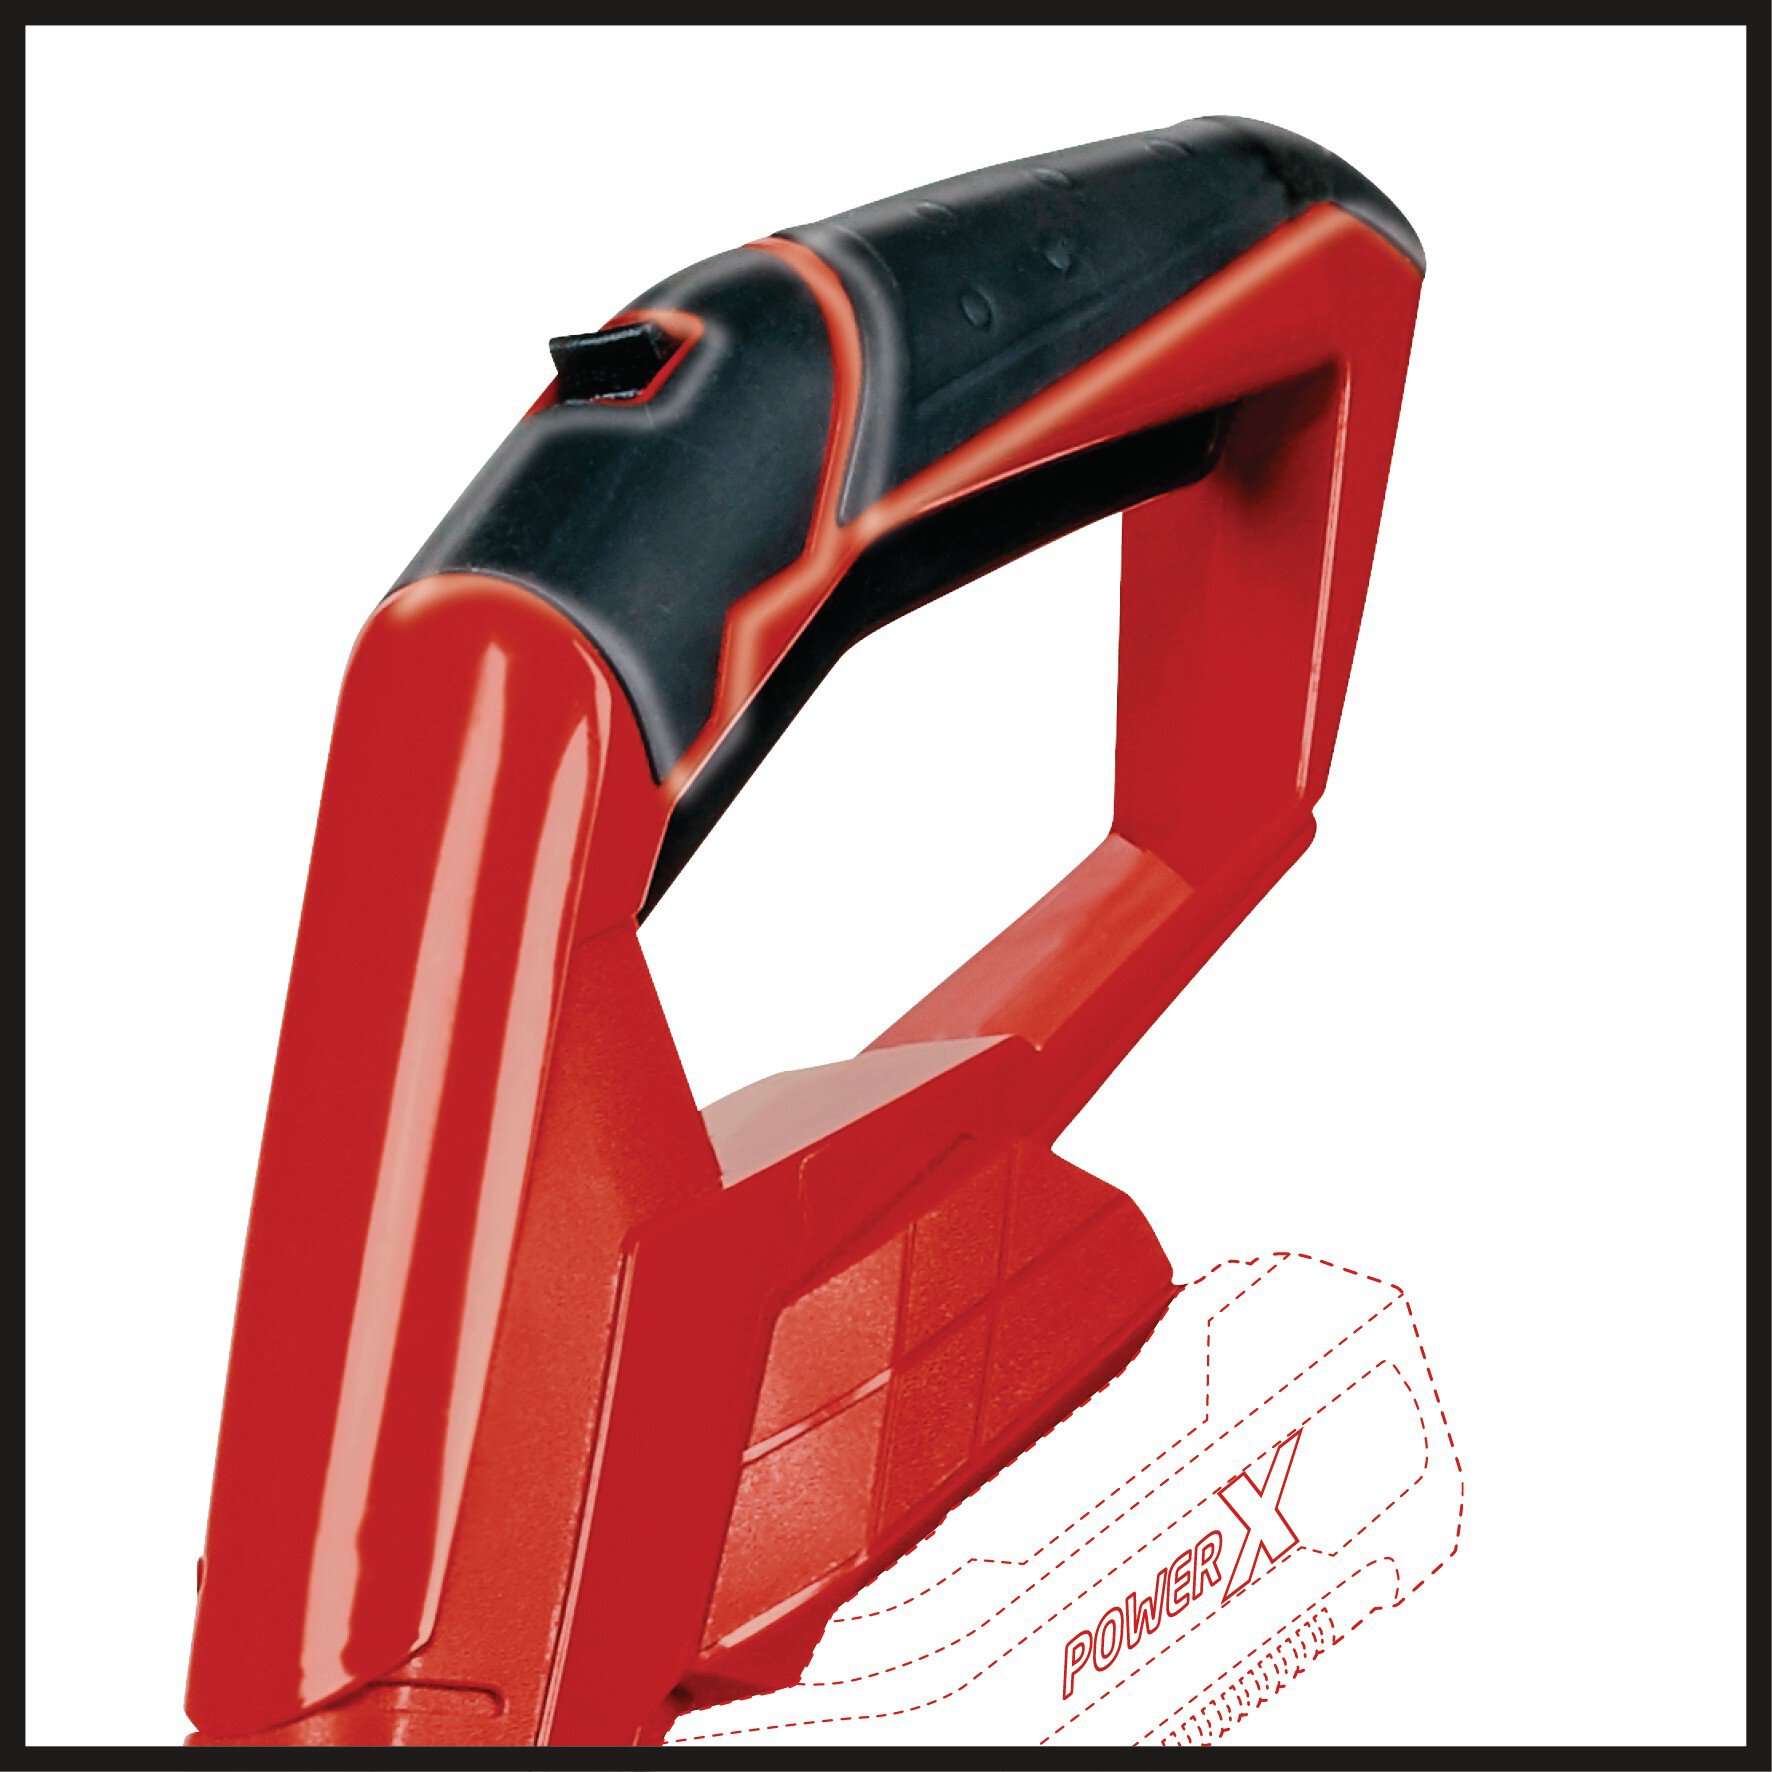 einhell-classic-cordless-grout-cleaner-3424050-detail_image-003